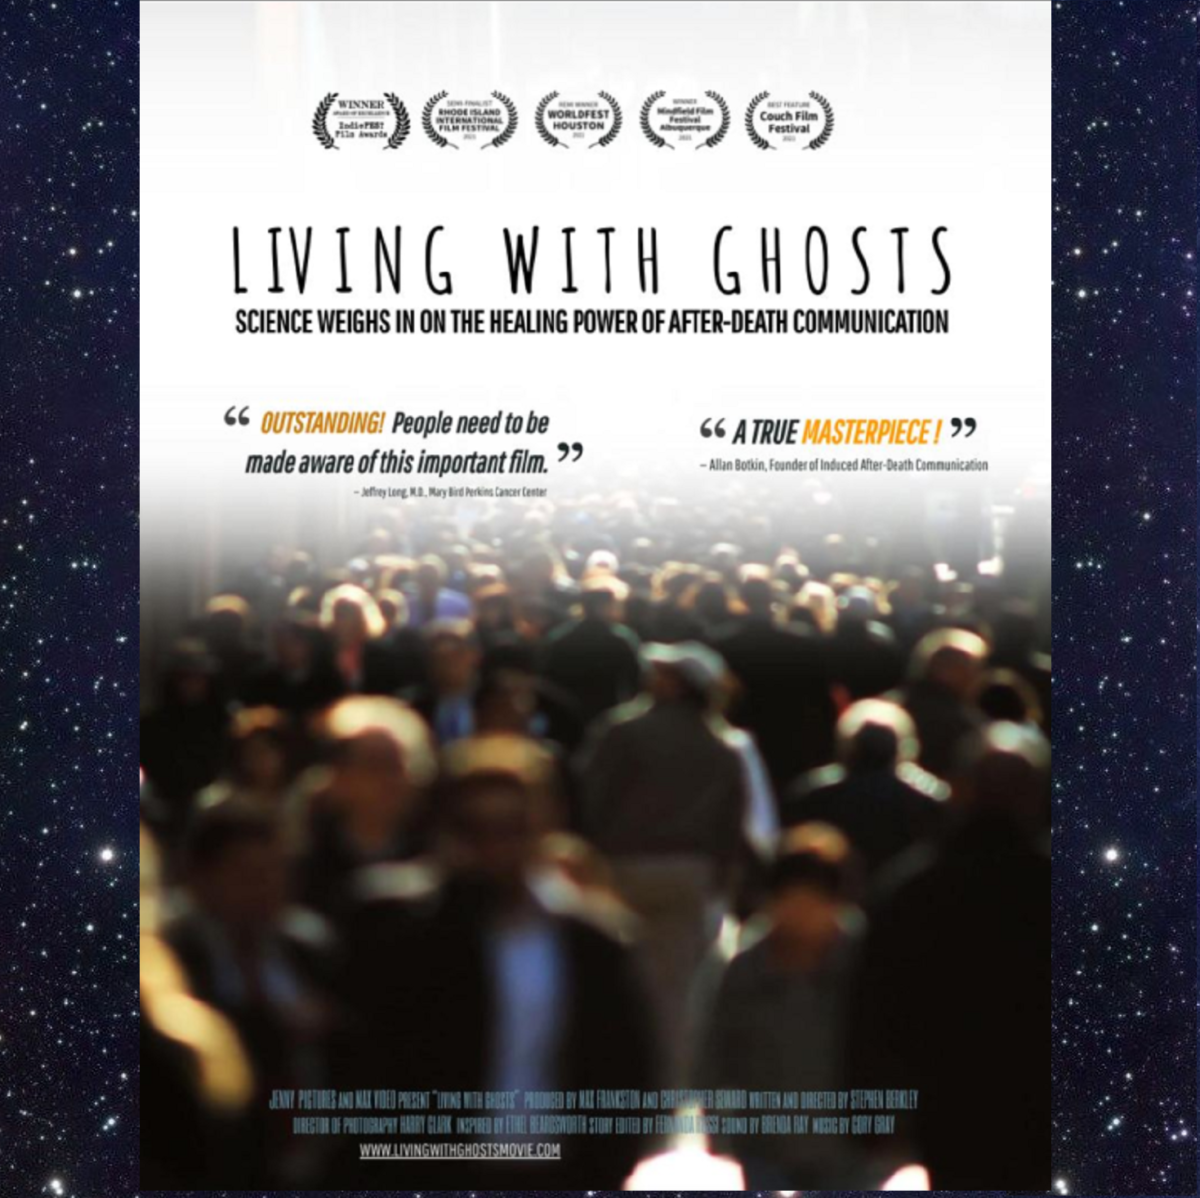 Special Event: “Living with Ghosts” Producers Panel